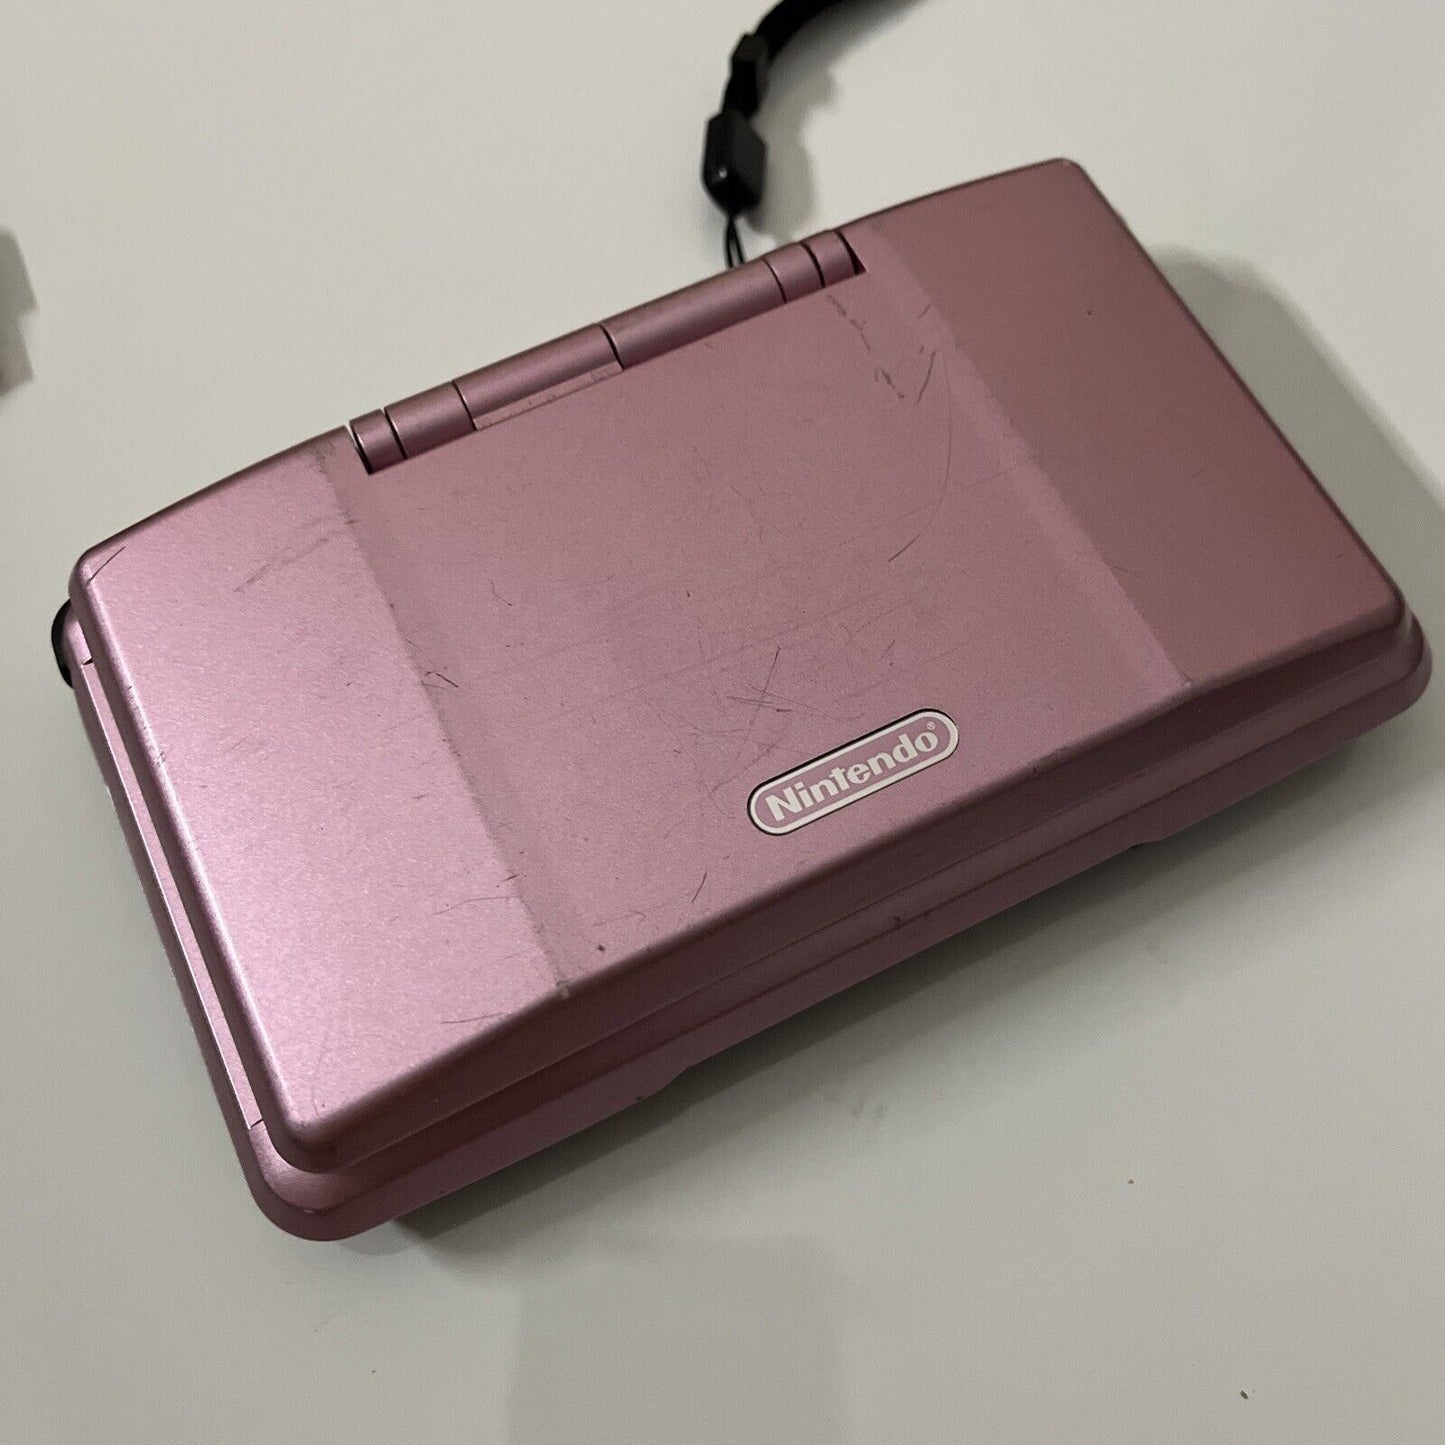 Nintendo DS Original Phat Console Mystic Pink with Charger